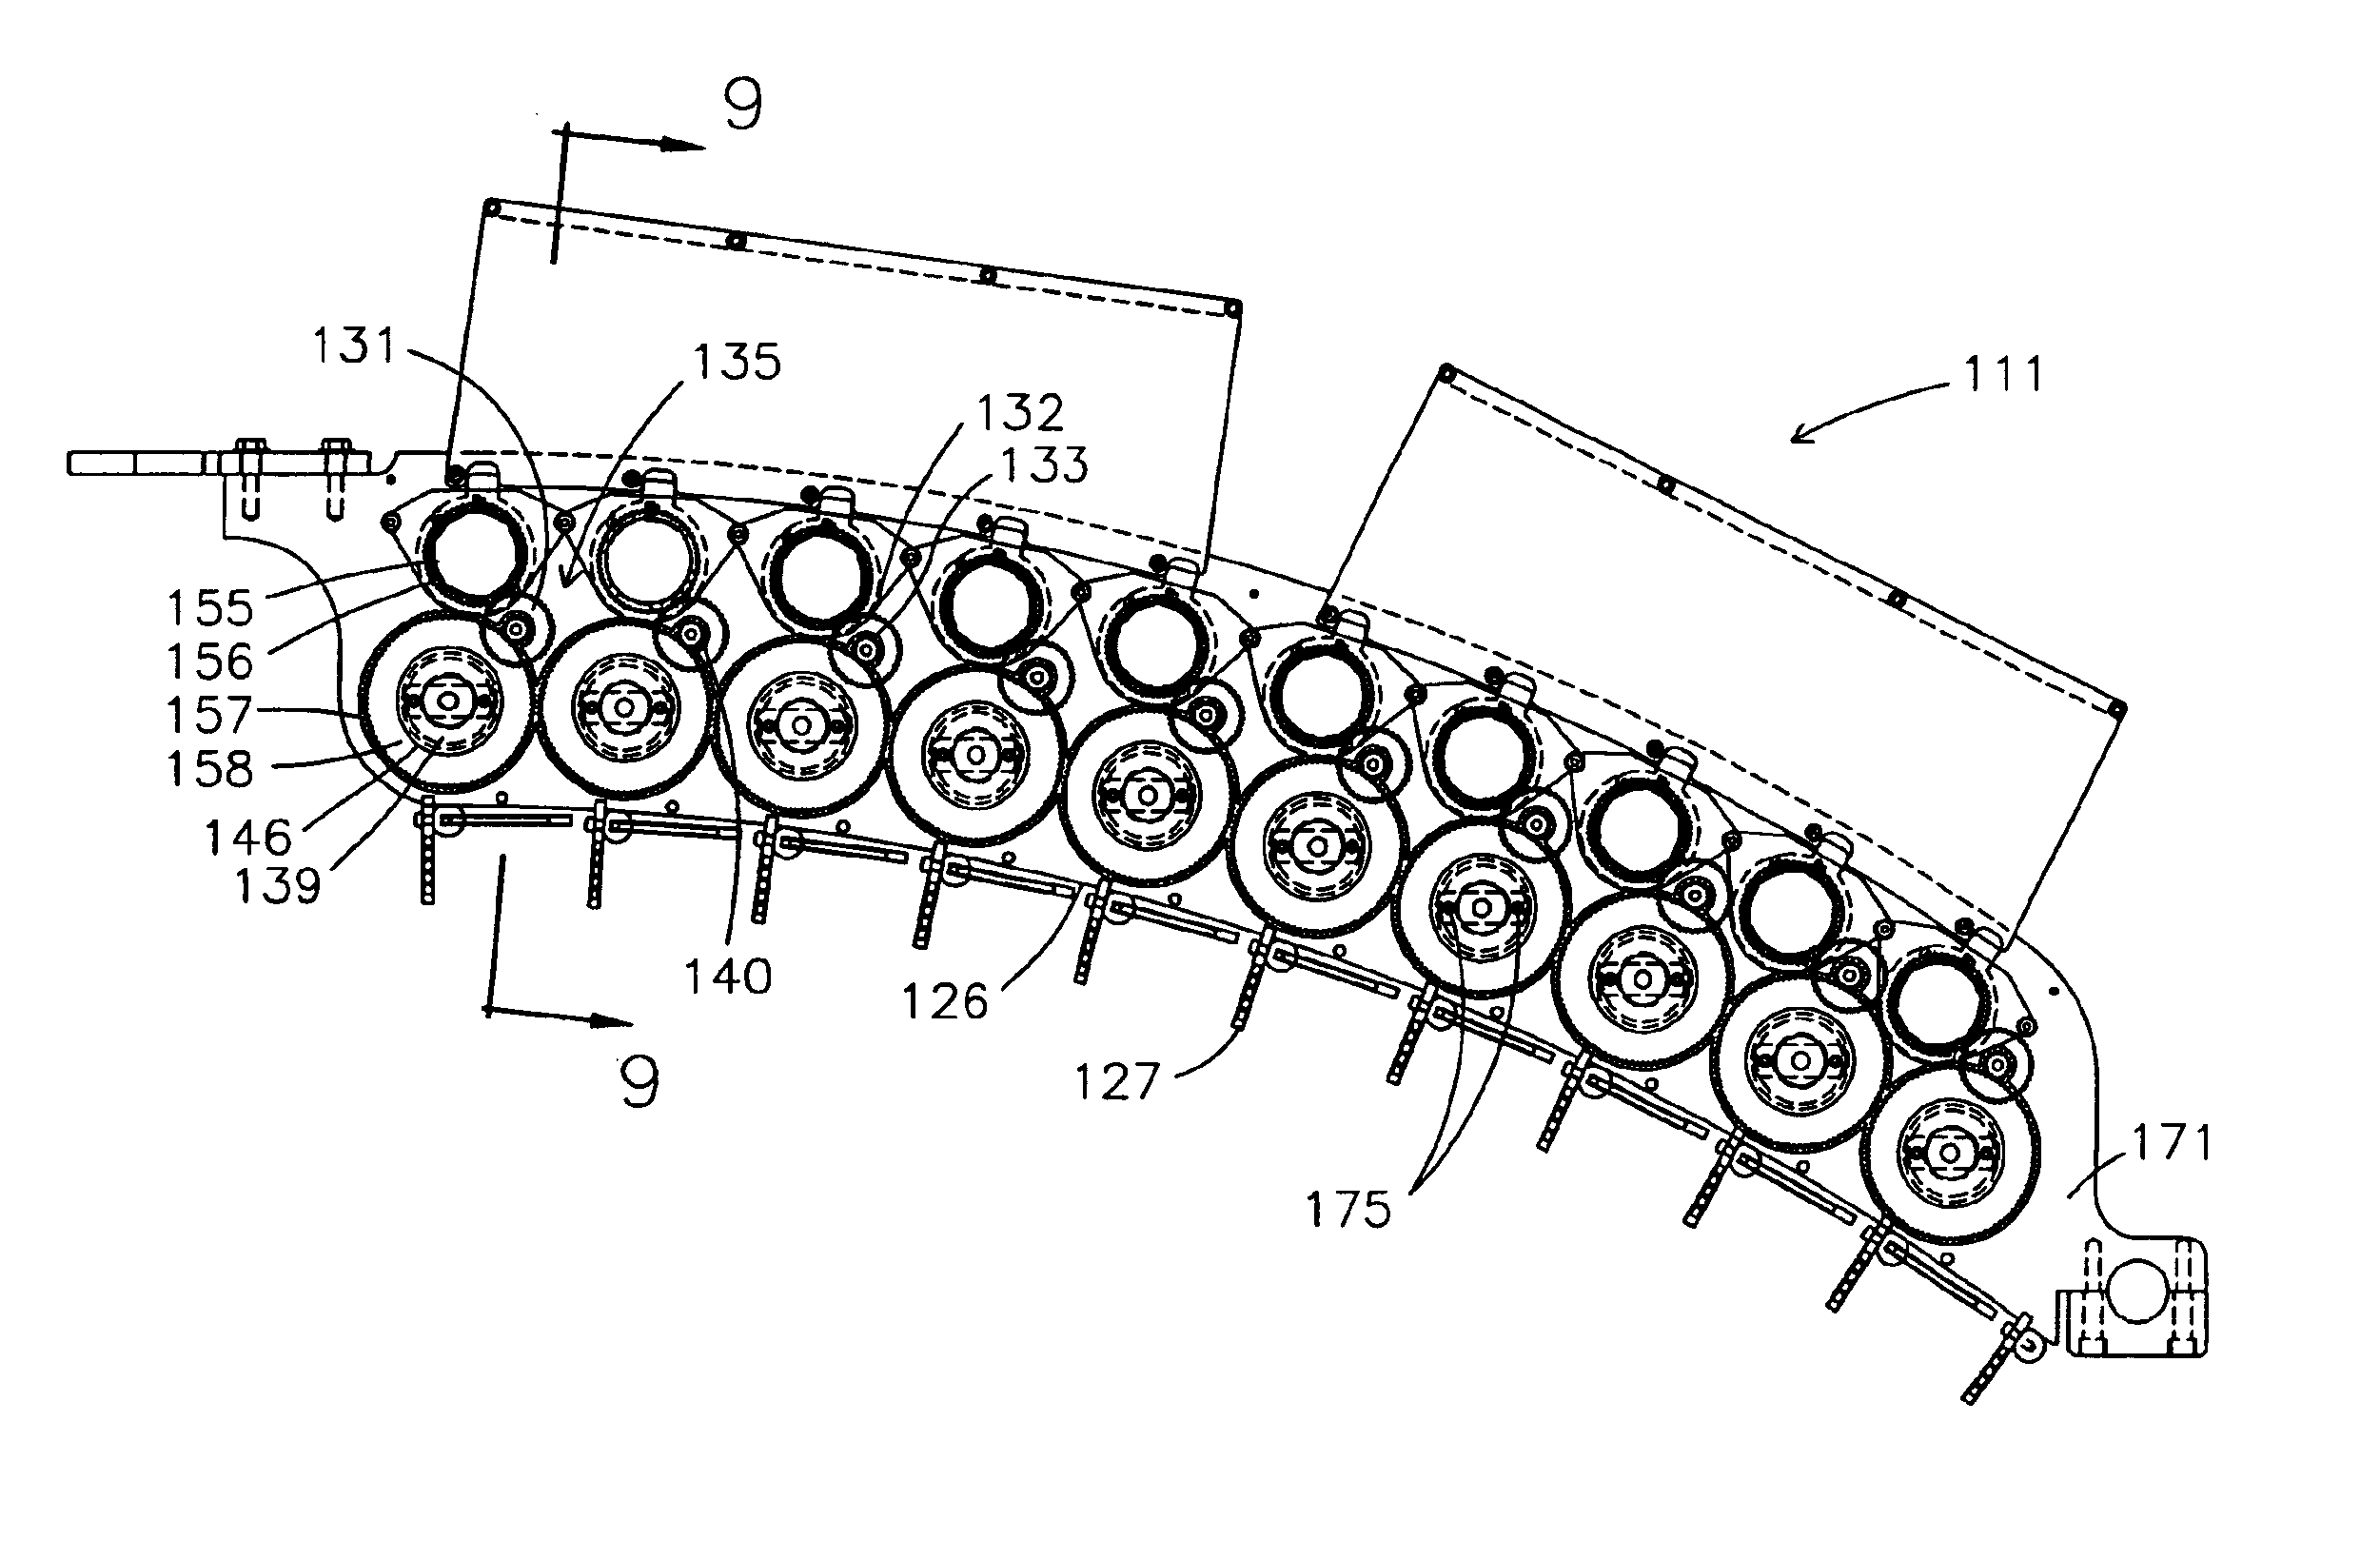 Double end servo scroll and direct scroll driver pattern attachment for tufting machine